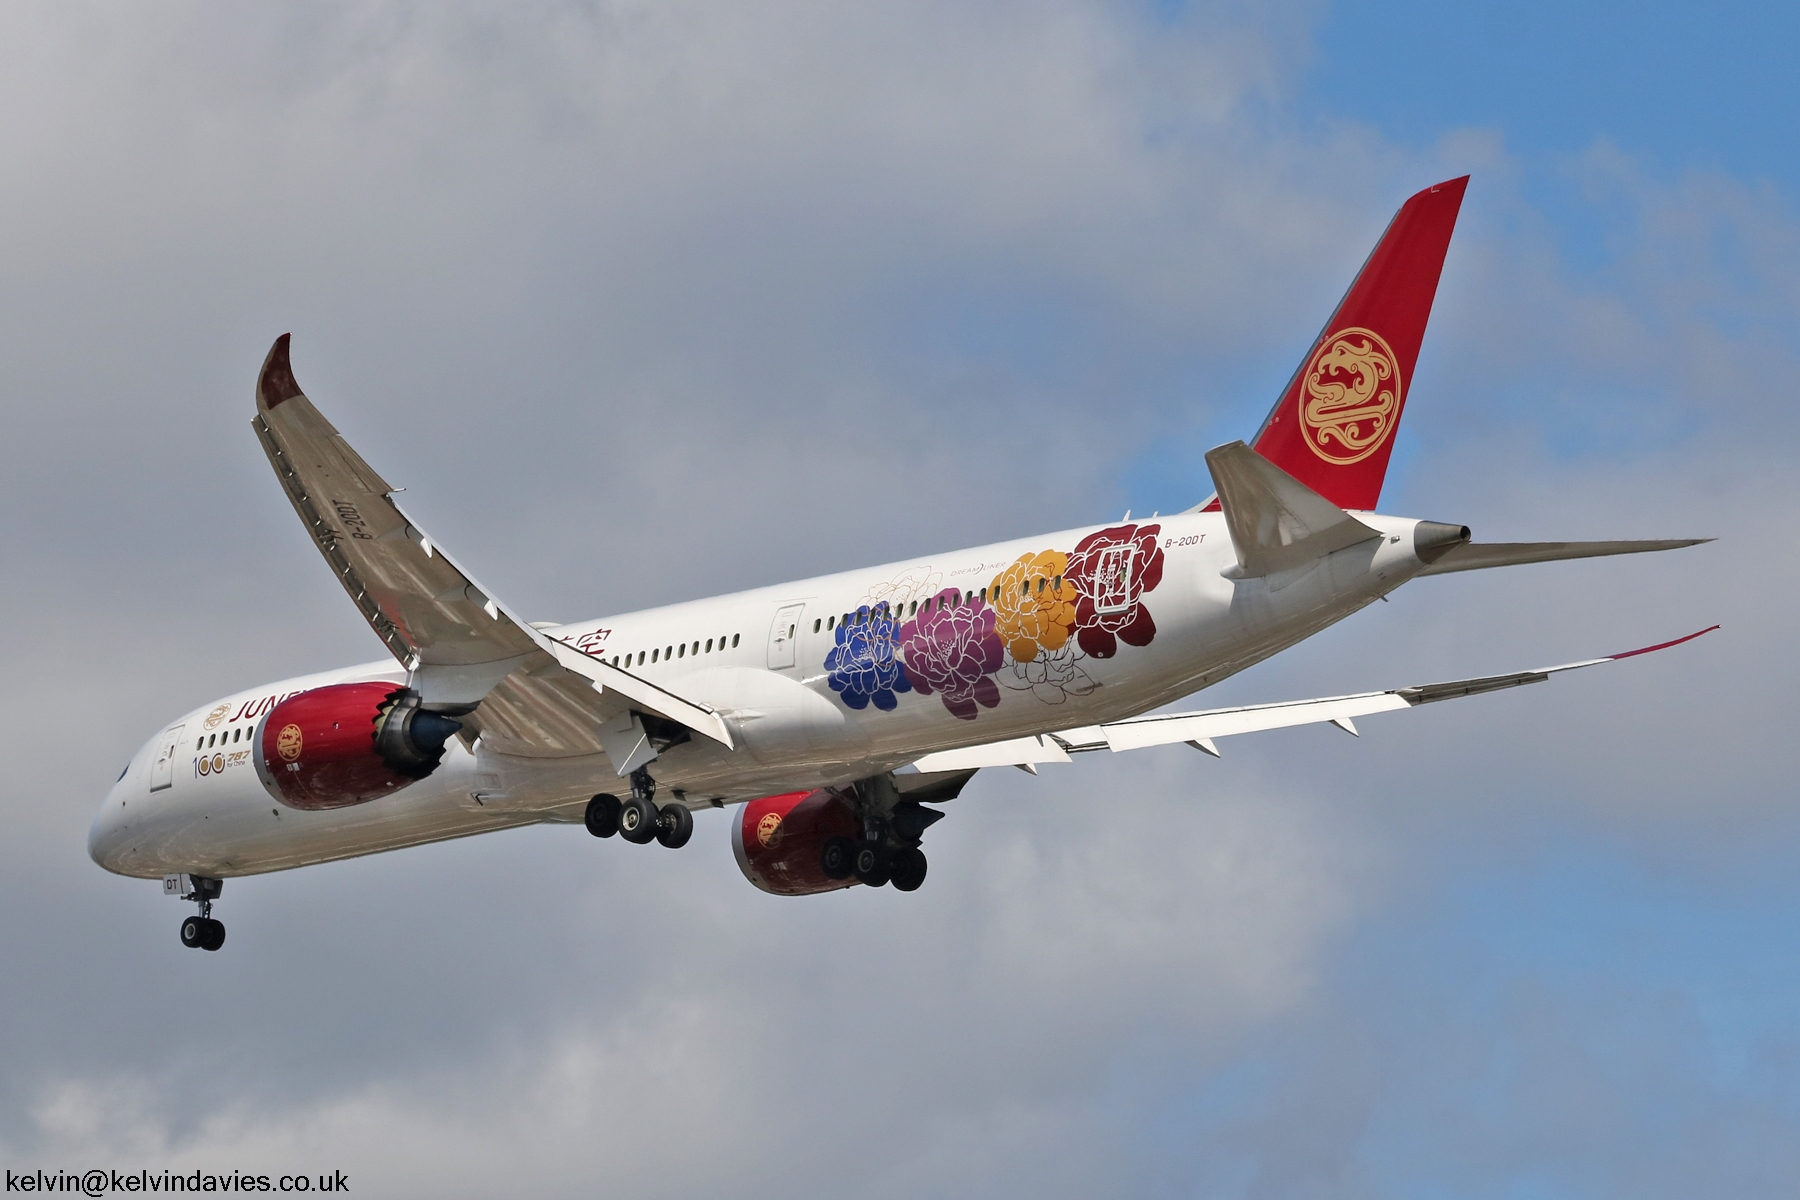 Juneyao Airlines 787 B-20DT